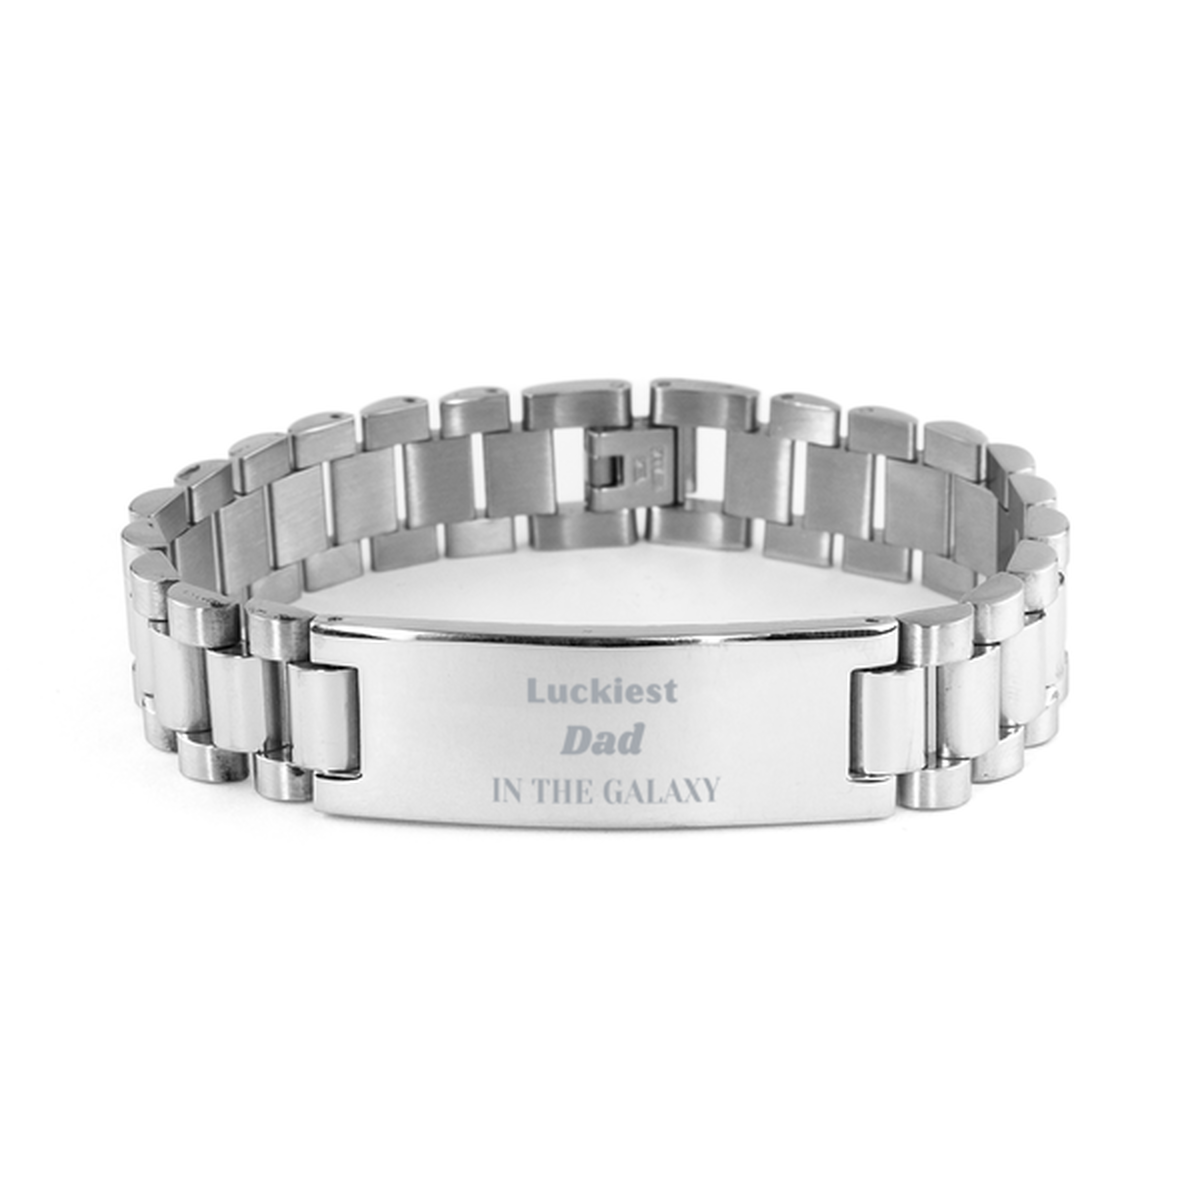 Luckiest Dad in the Galaxy, To My Dad Engraved Gifts, Christmas Dad Ladder Stainless Steel Bracelet Gifts, X-mas Birthday Unique Gifts For Dad Men Women